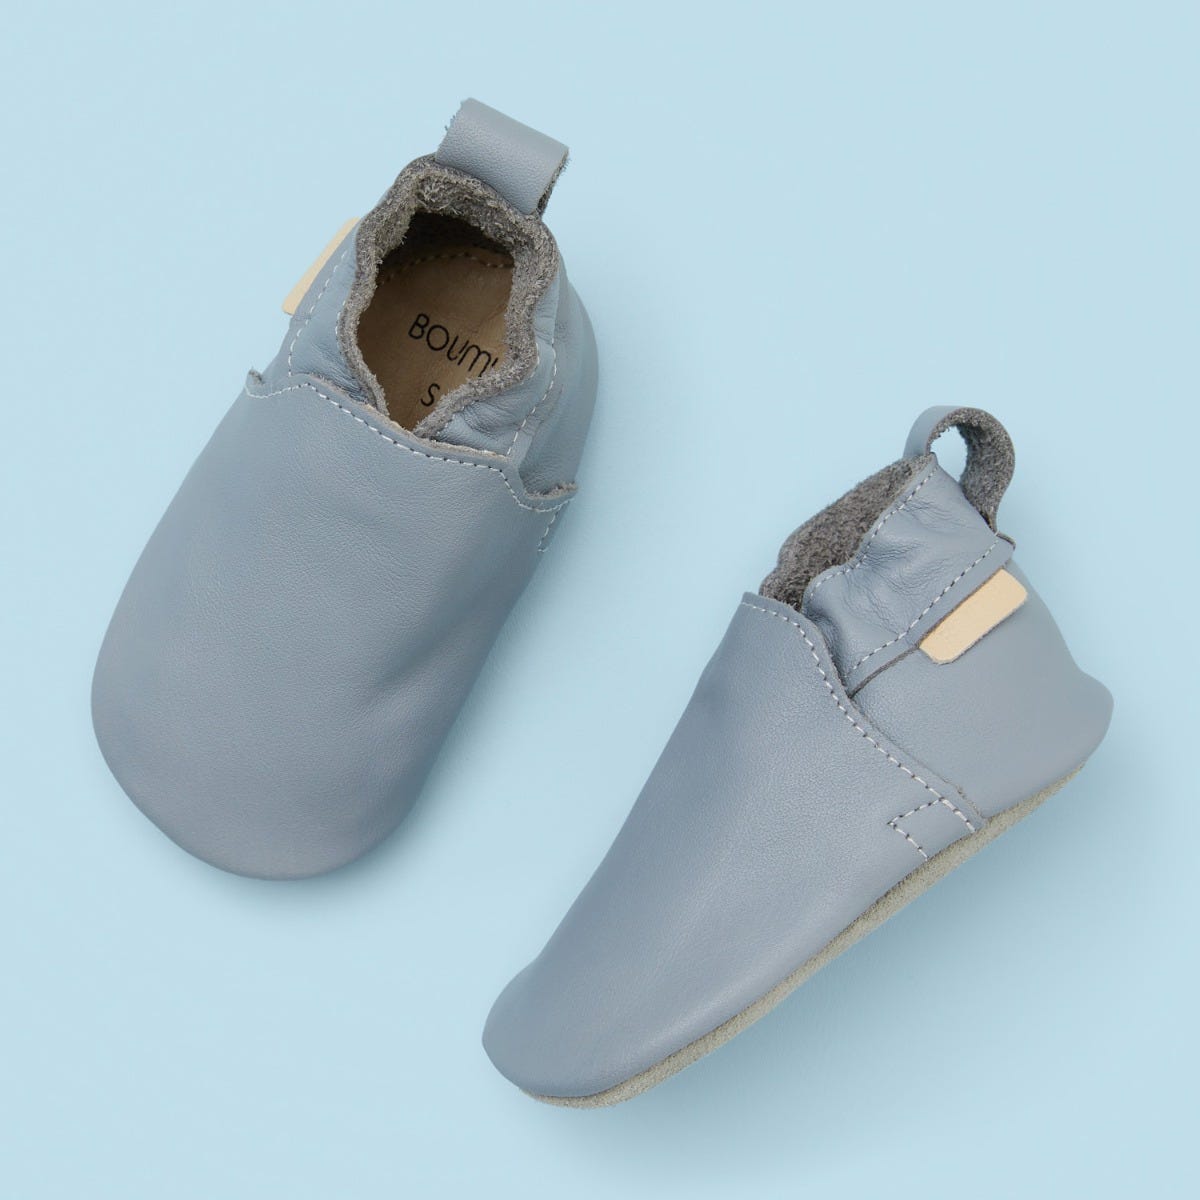 Boumy Blue Soft Leather Shoes 6 to 12 months